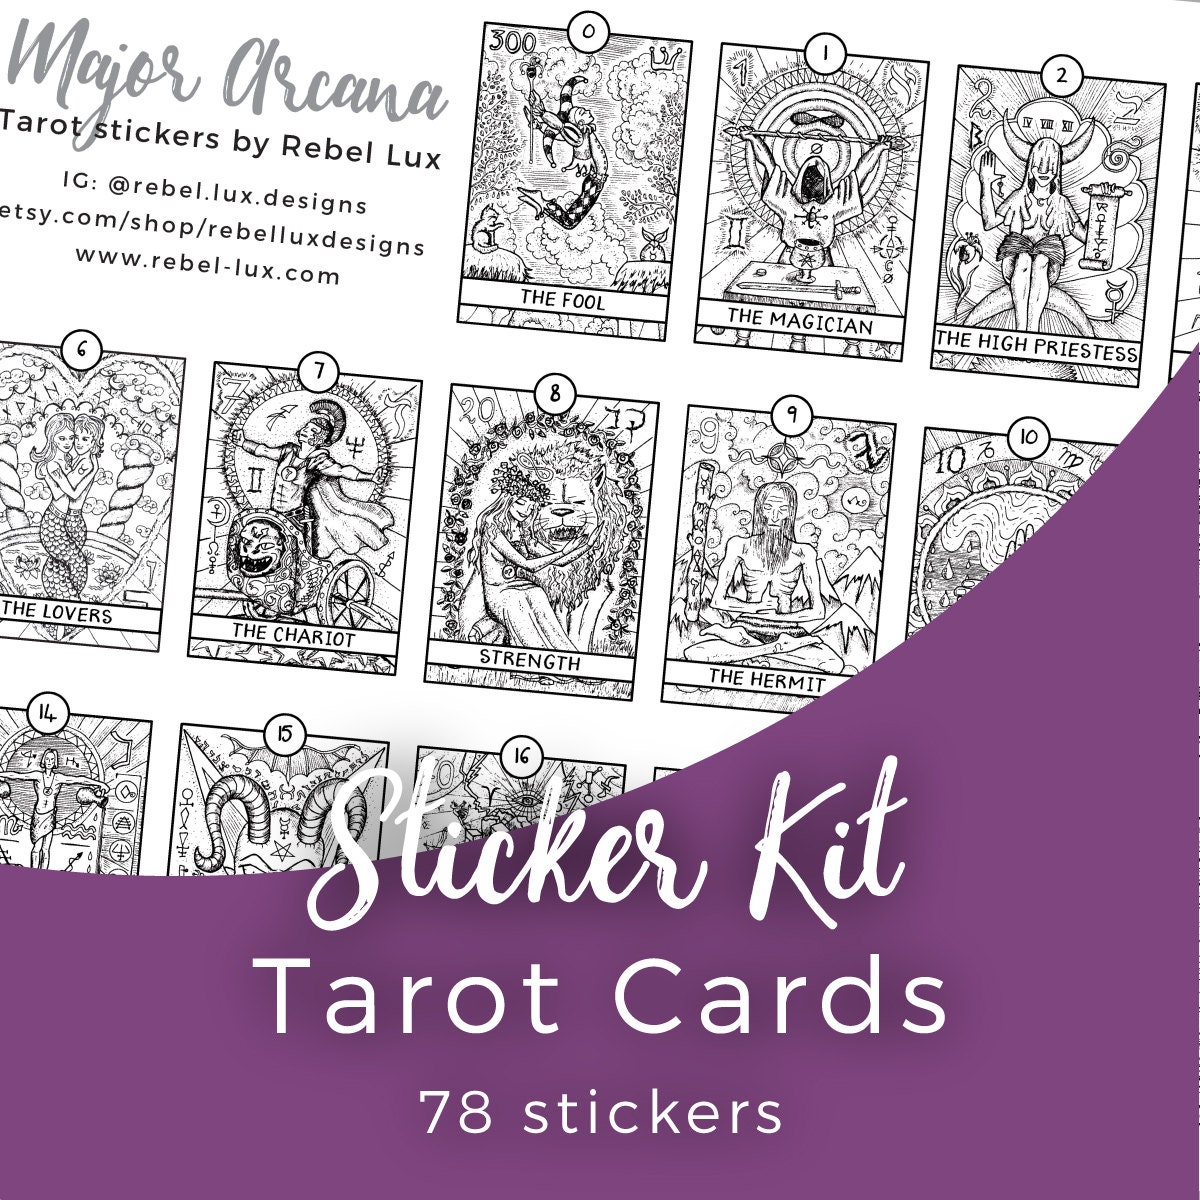 Tarot card stickers 78 planner stickers in black & white for